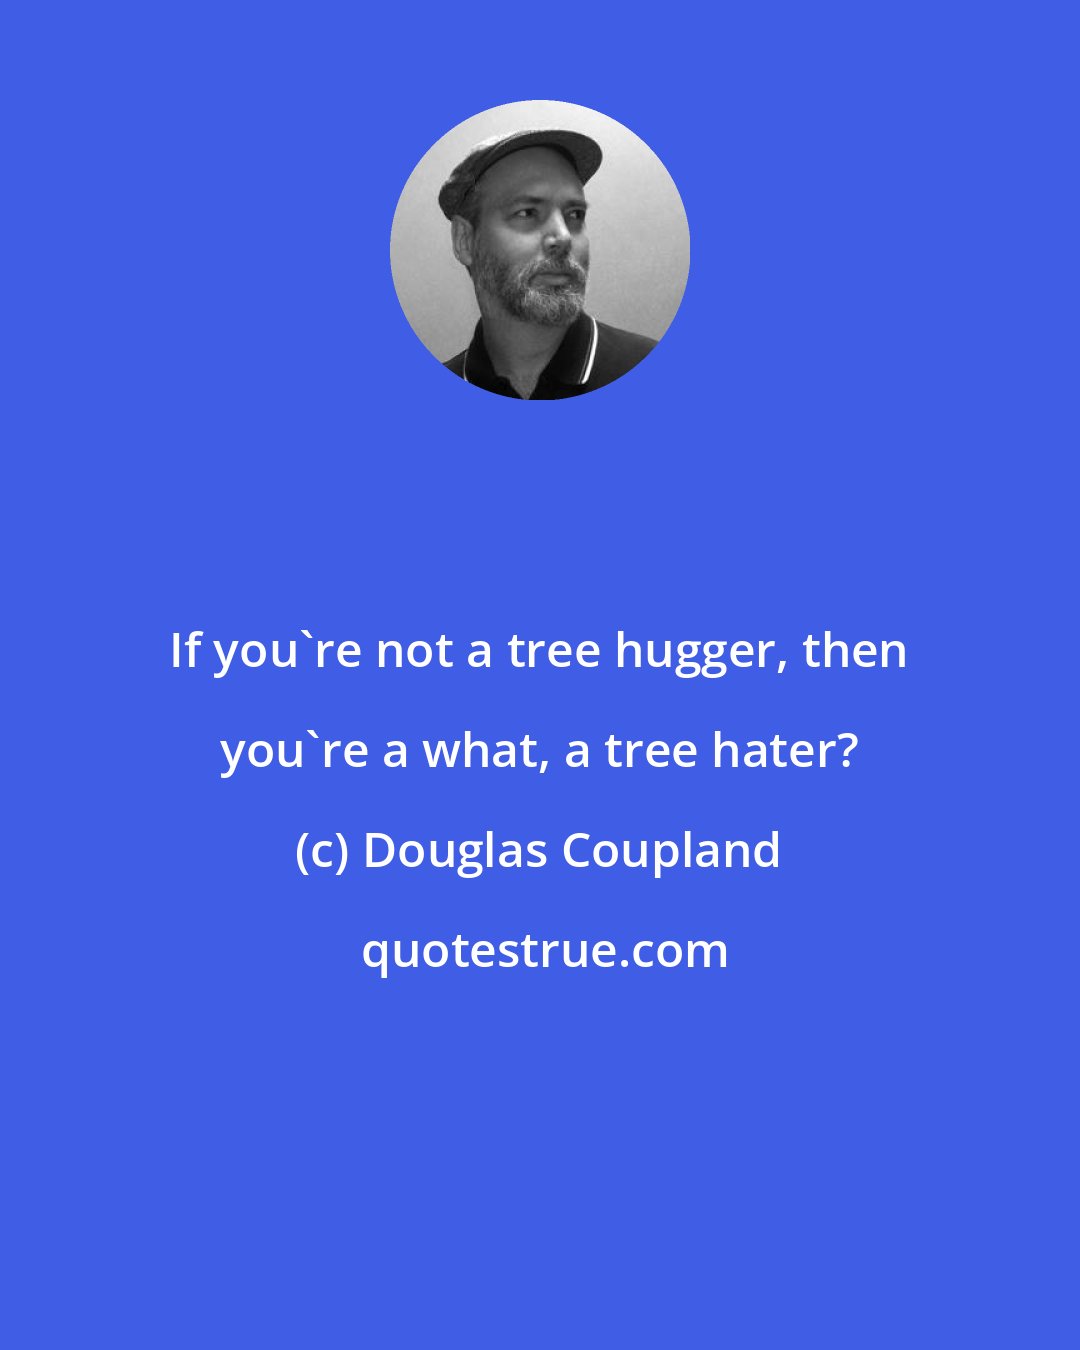 Douglas Coupland: If you're not a tree hugger, then you're a what, a tree hater?